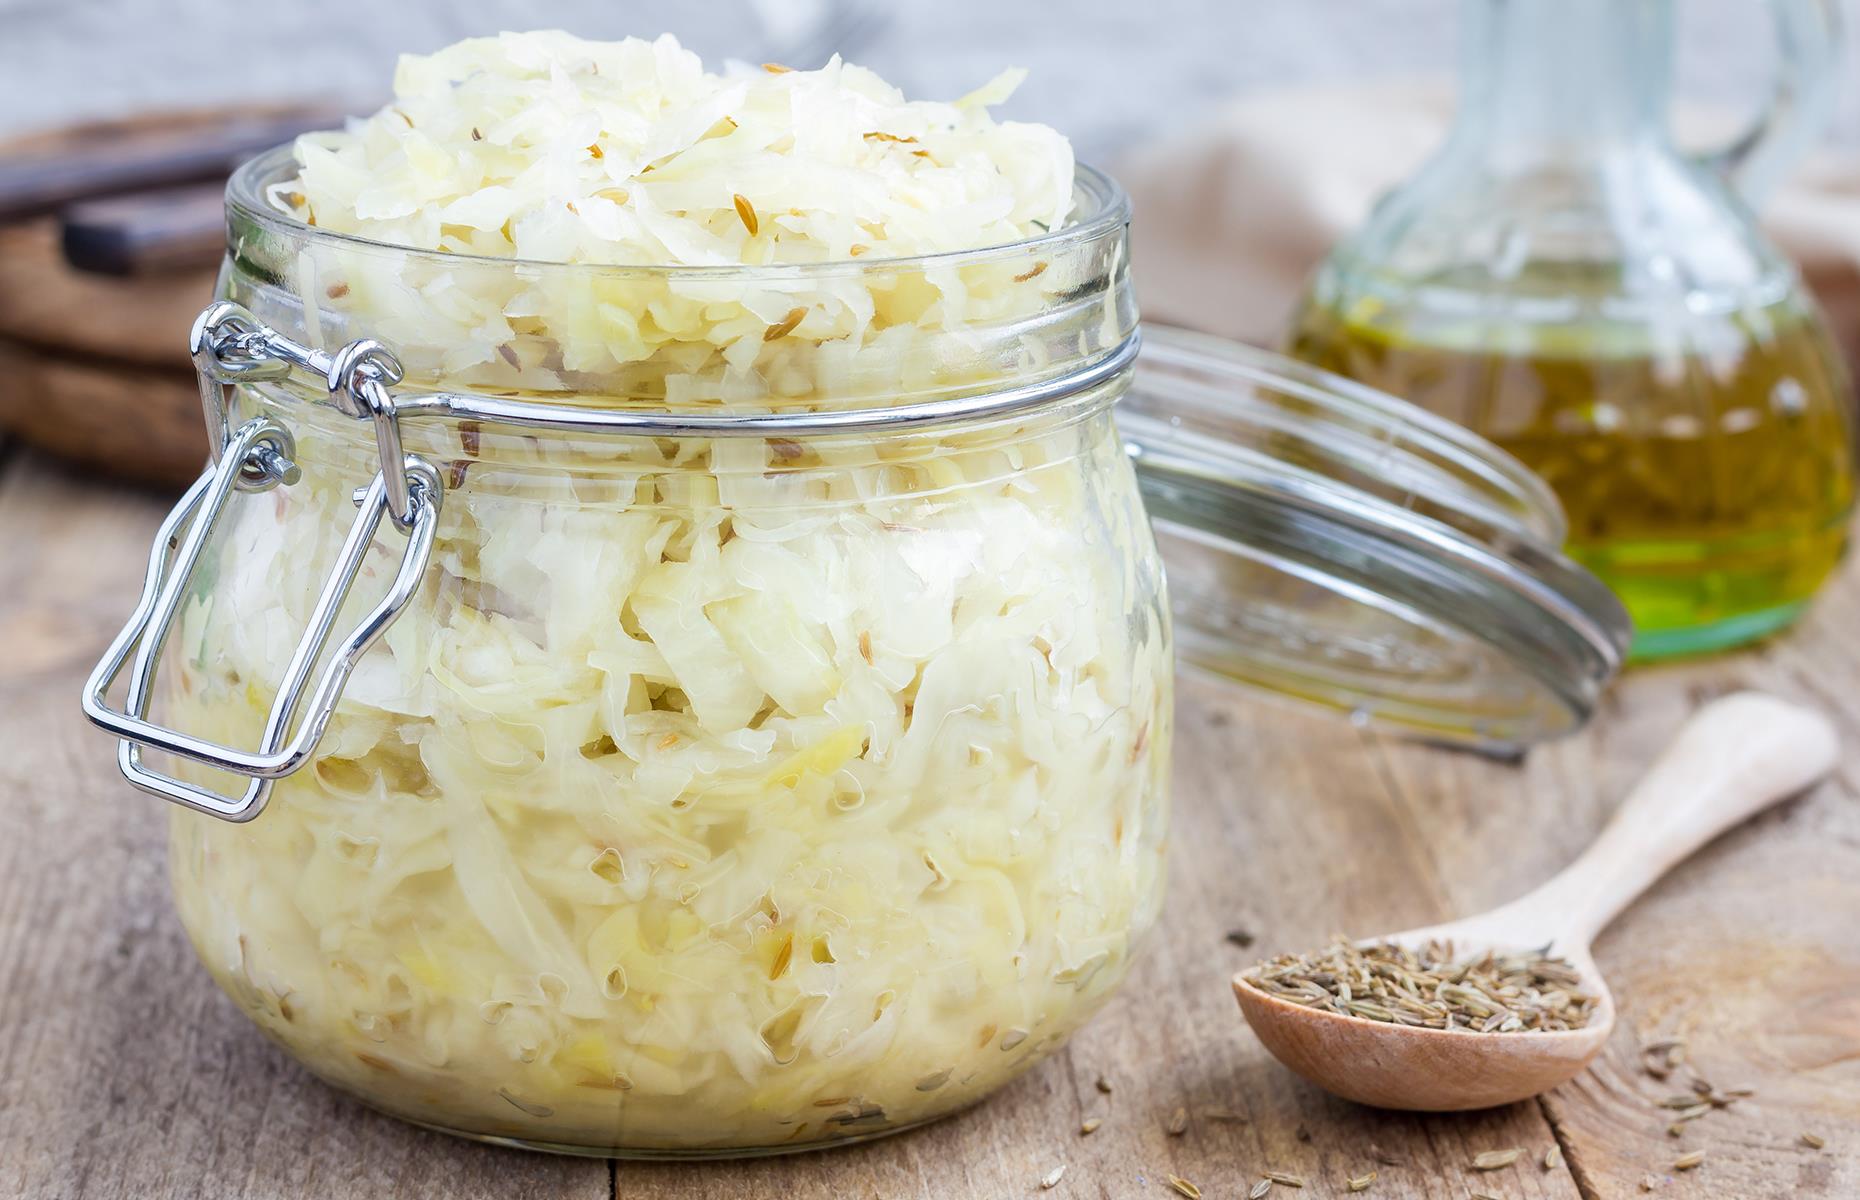 <p>The fermented cabbage dish sauerkraut is most readily associated with Eastern Europe today – but did you know its origin story begins in ancient China? It's said that <a href="https://www.thespruceeats.com/sauerkraut-the-quintessential-eastern-european-vegetable-1137498">the builders of the Great Wall of China began fermenting cabbage in rice wine</a> to make it last for longer as they toiled away. Now it's often served as an accompaniment to things like schnitzel and bratwurst.</p>